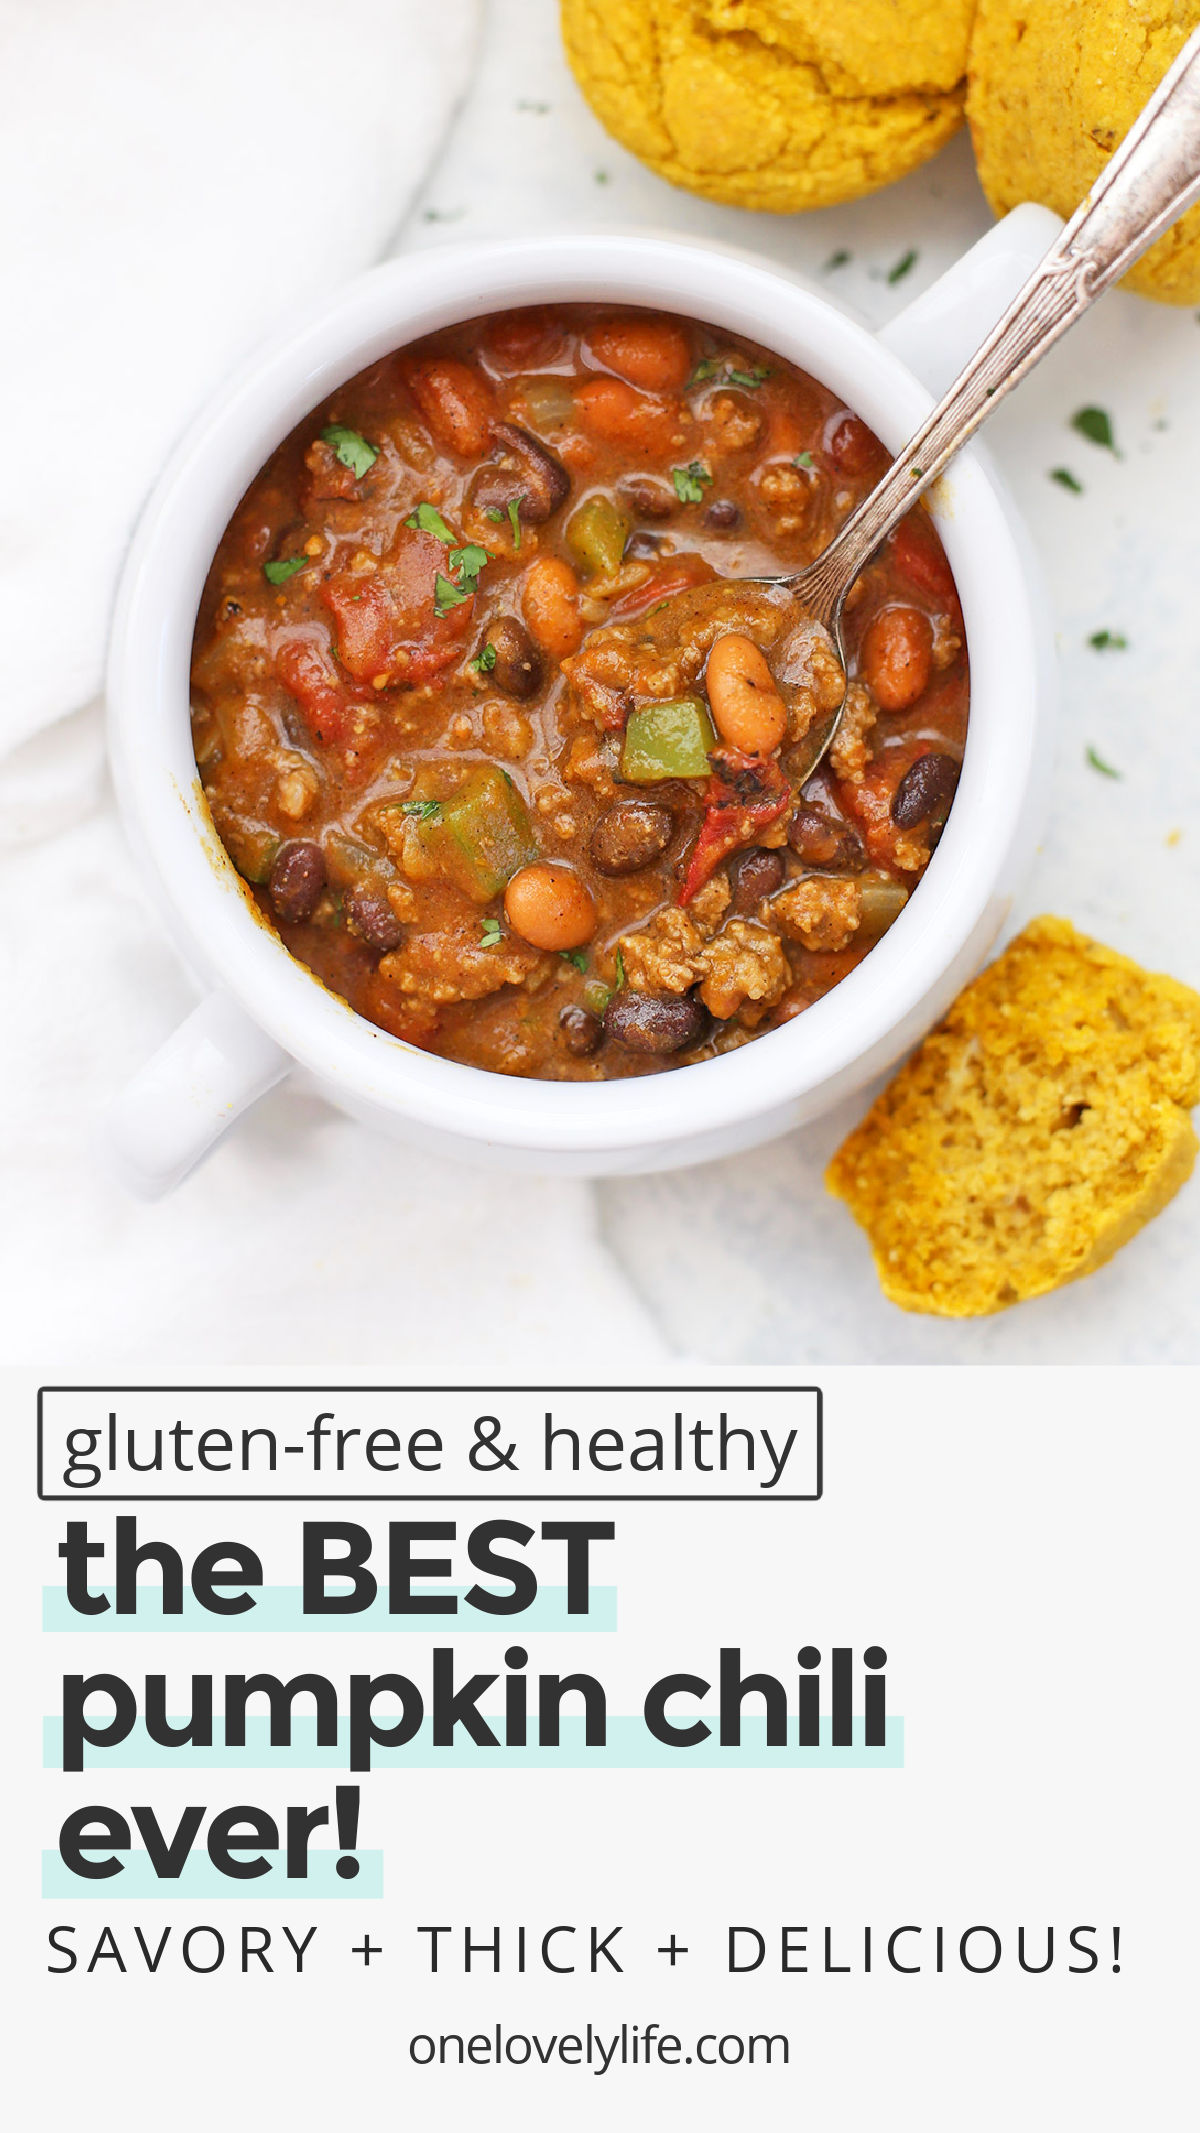 The BEST EVER Pumpkin Chili - This healthy pumpkin chili recipe might just win you a prize! (gluten-free, paleo-friendly and vegan-friendly!) // savory pumpkin recipes // pumpkin soup // how to make pumpkin chili // chili cook-off winner